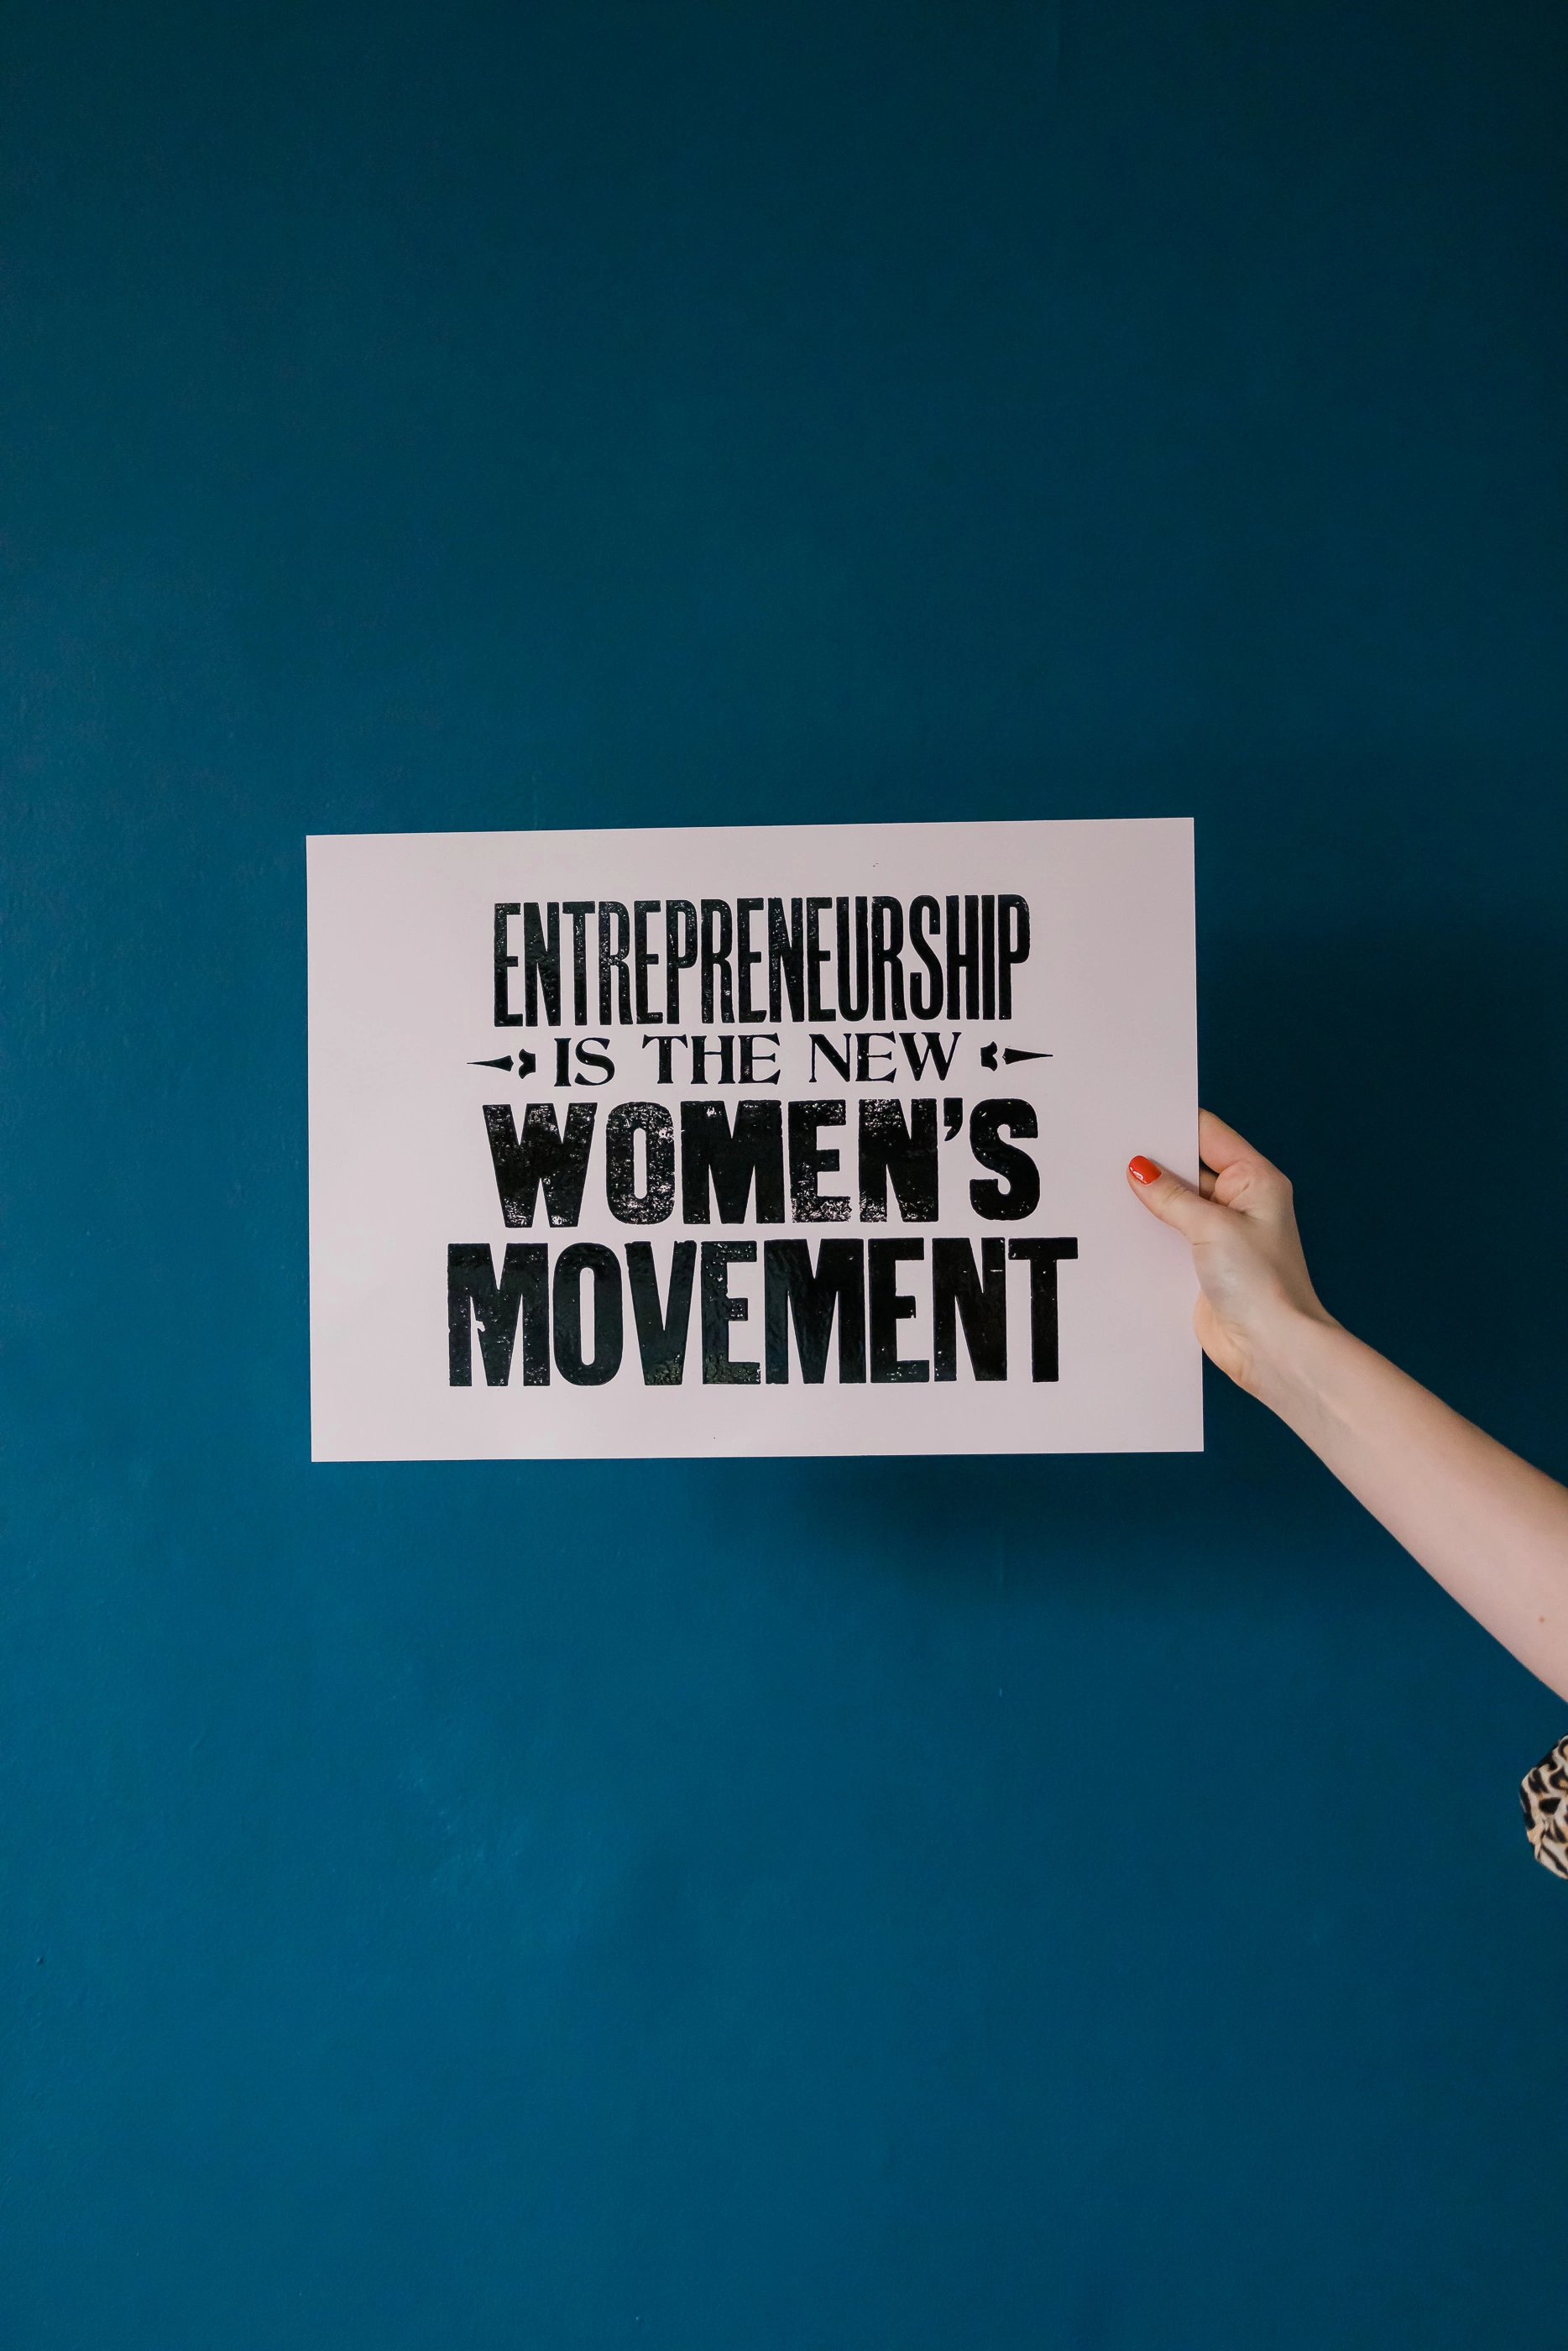 Entrepreneurship is the new women's movement print by The Small Print Company in front of a navy blue background